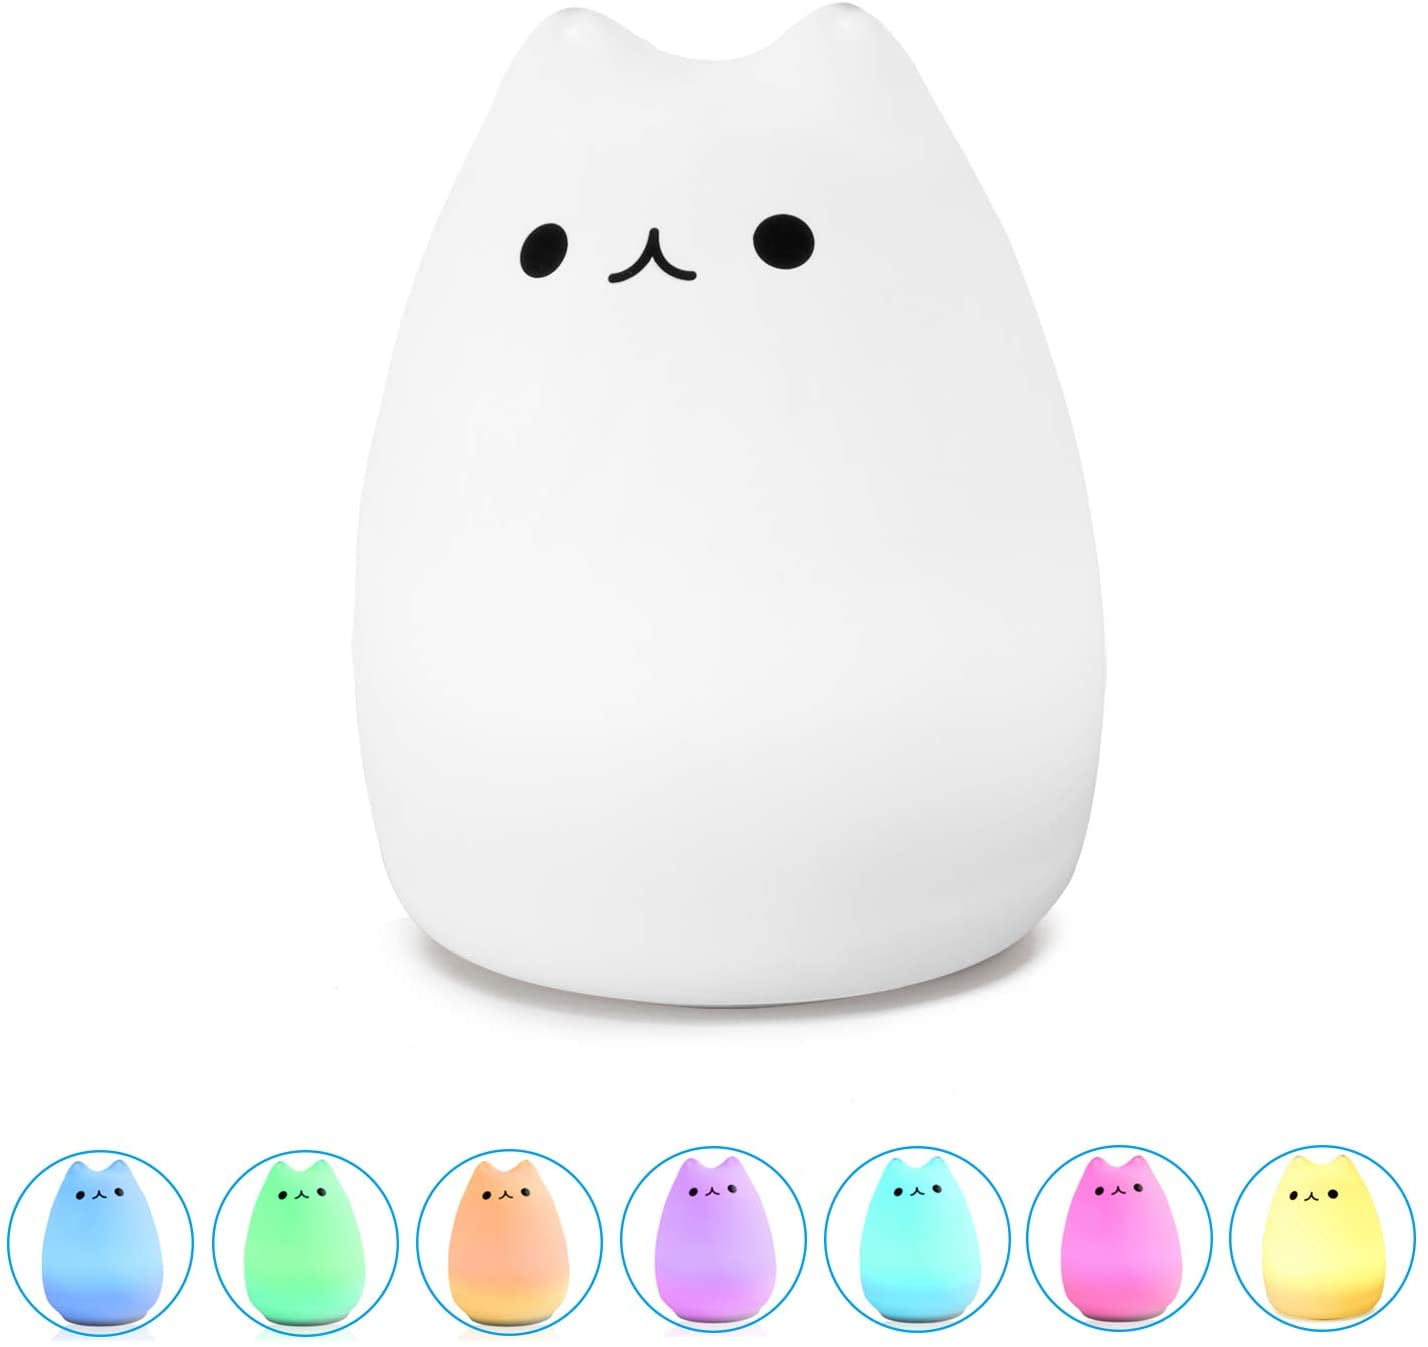 HOT Cute CAT Silicone USB Recharge LED Night Light Desk Sensitive Lamps Best 